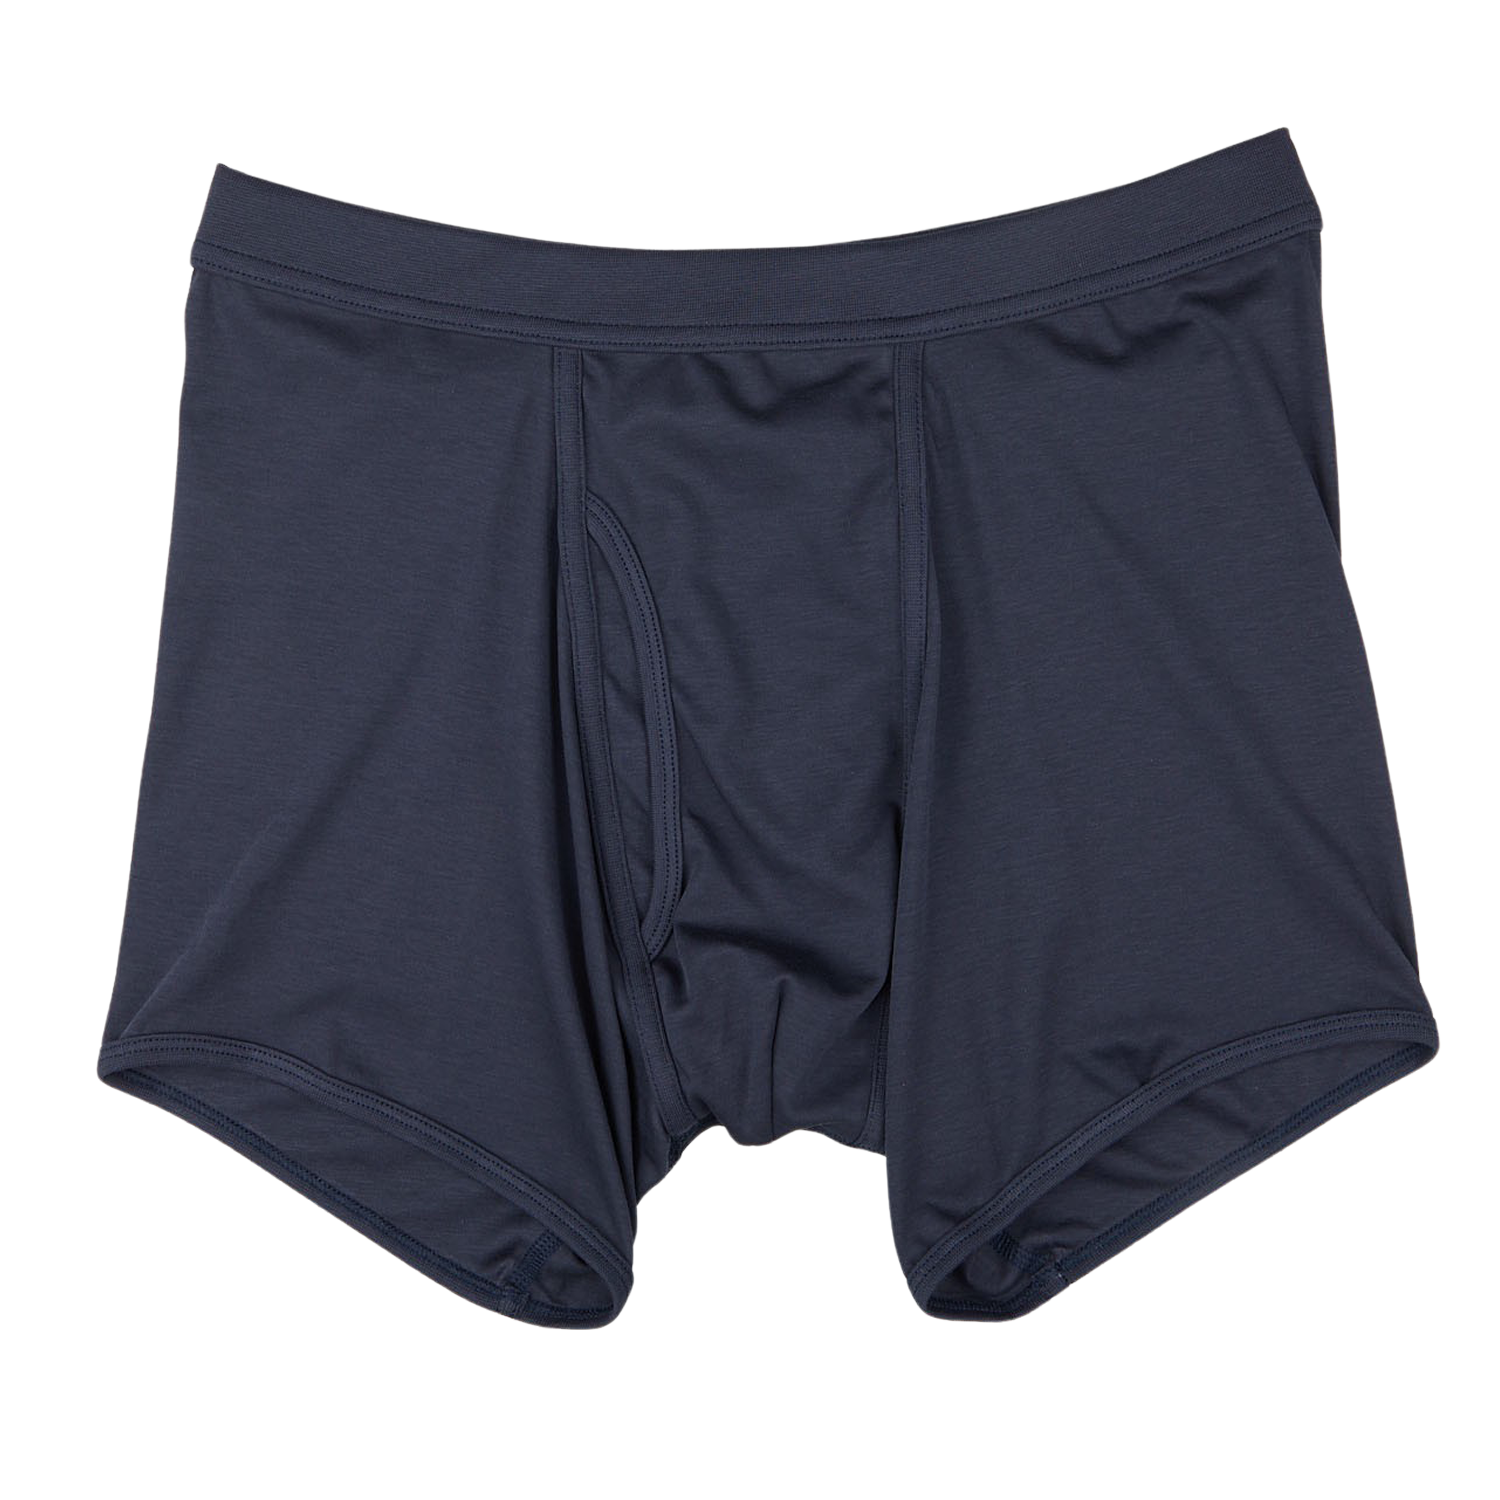 A pair of Parisian Night Pima Cotton Wil Trunks from The White Briefs in a classic trunk style, crafted from soft organic pima cotton, with a fly front, displayed on a plain white background.